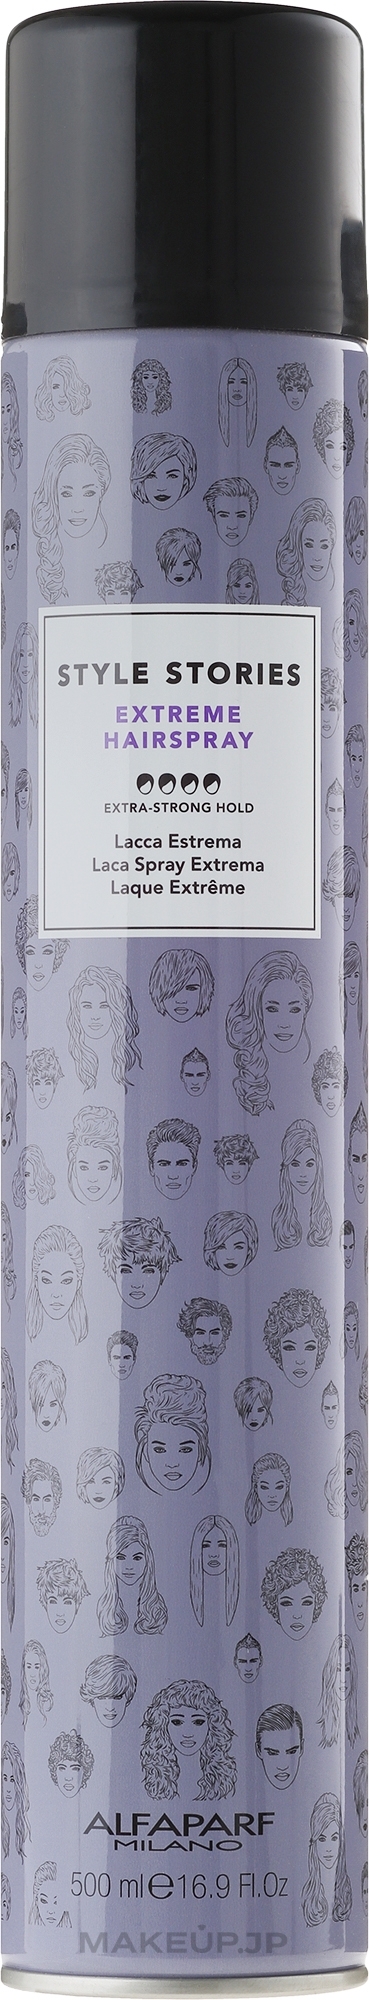 Extra Strong Hold Hair Spray - Alfaparf Milano Style Stories Extra Strong Hairspray — photo 500 ml